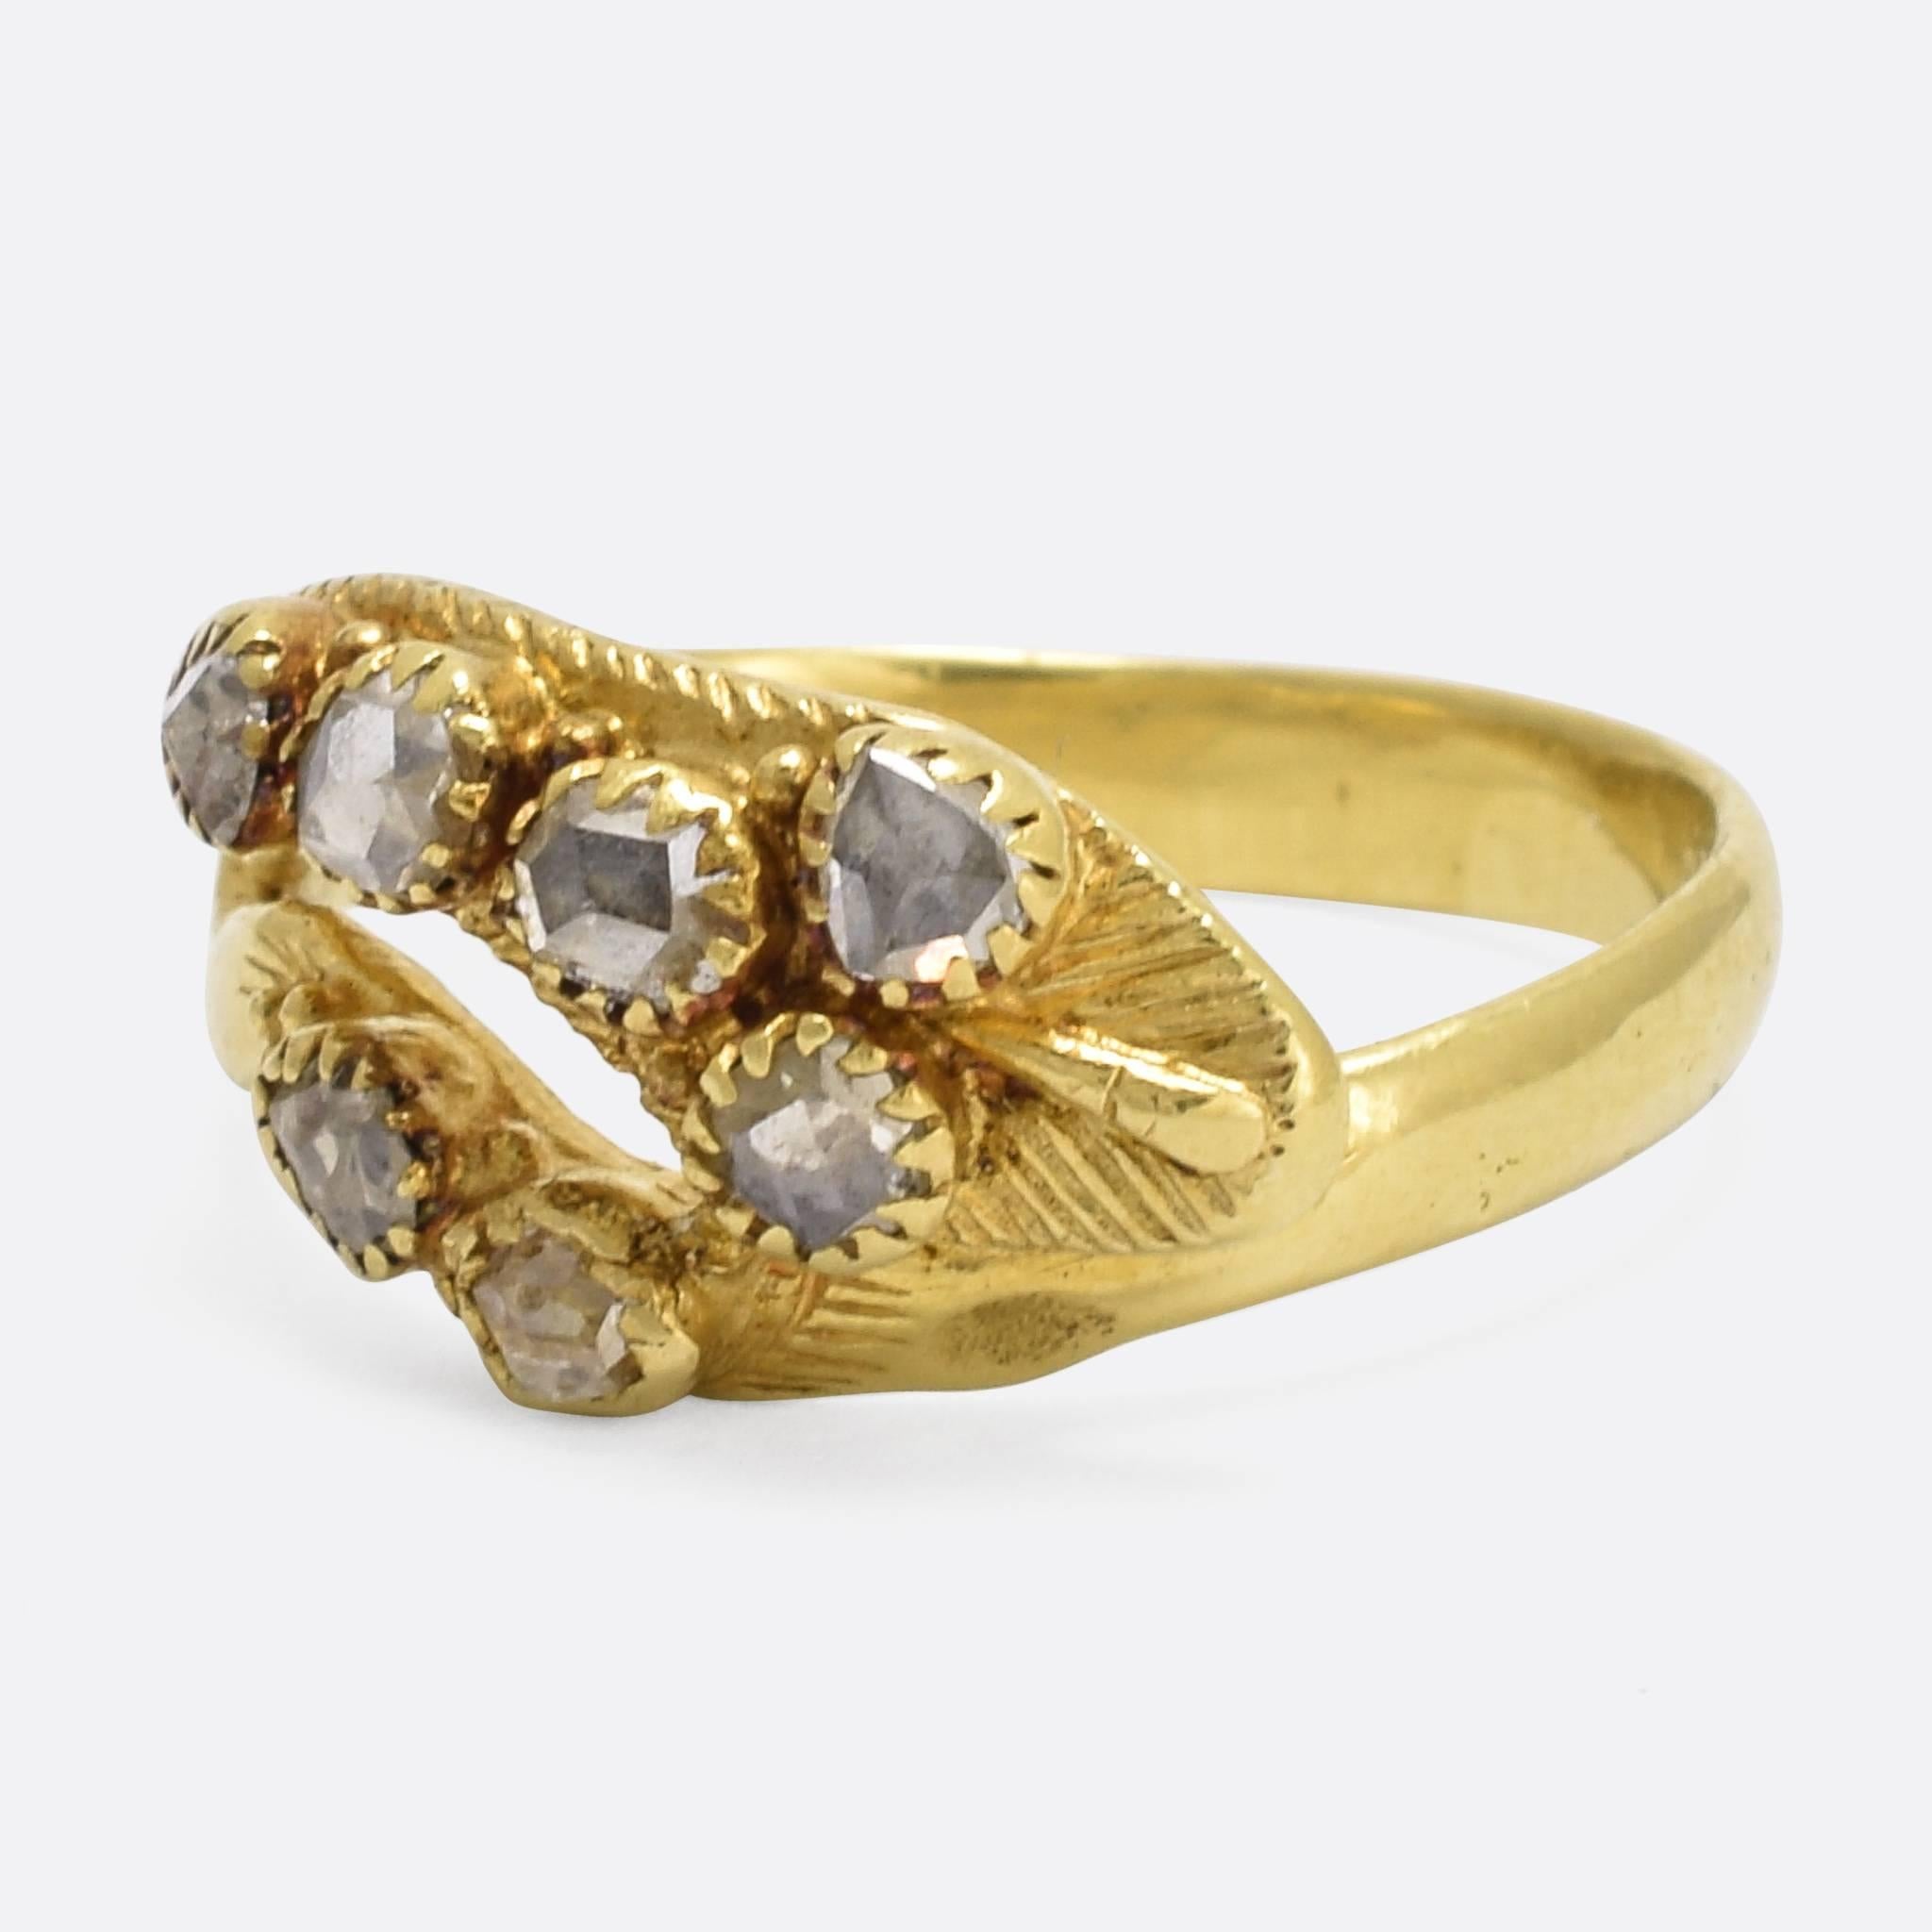 A late 18th Century snake ring, set with rose cut diamonds. It dates to c.1780, modelled in 18k yellow gold, with wonderful hand-chased textures and detailing. A fine, and quite unusual example of this enduring style. Ring size: 6.5.